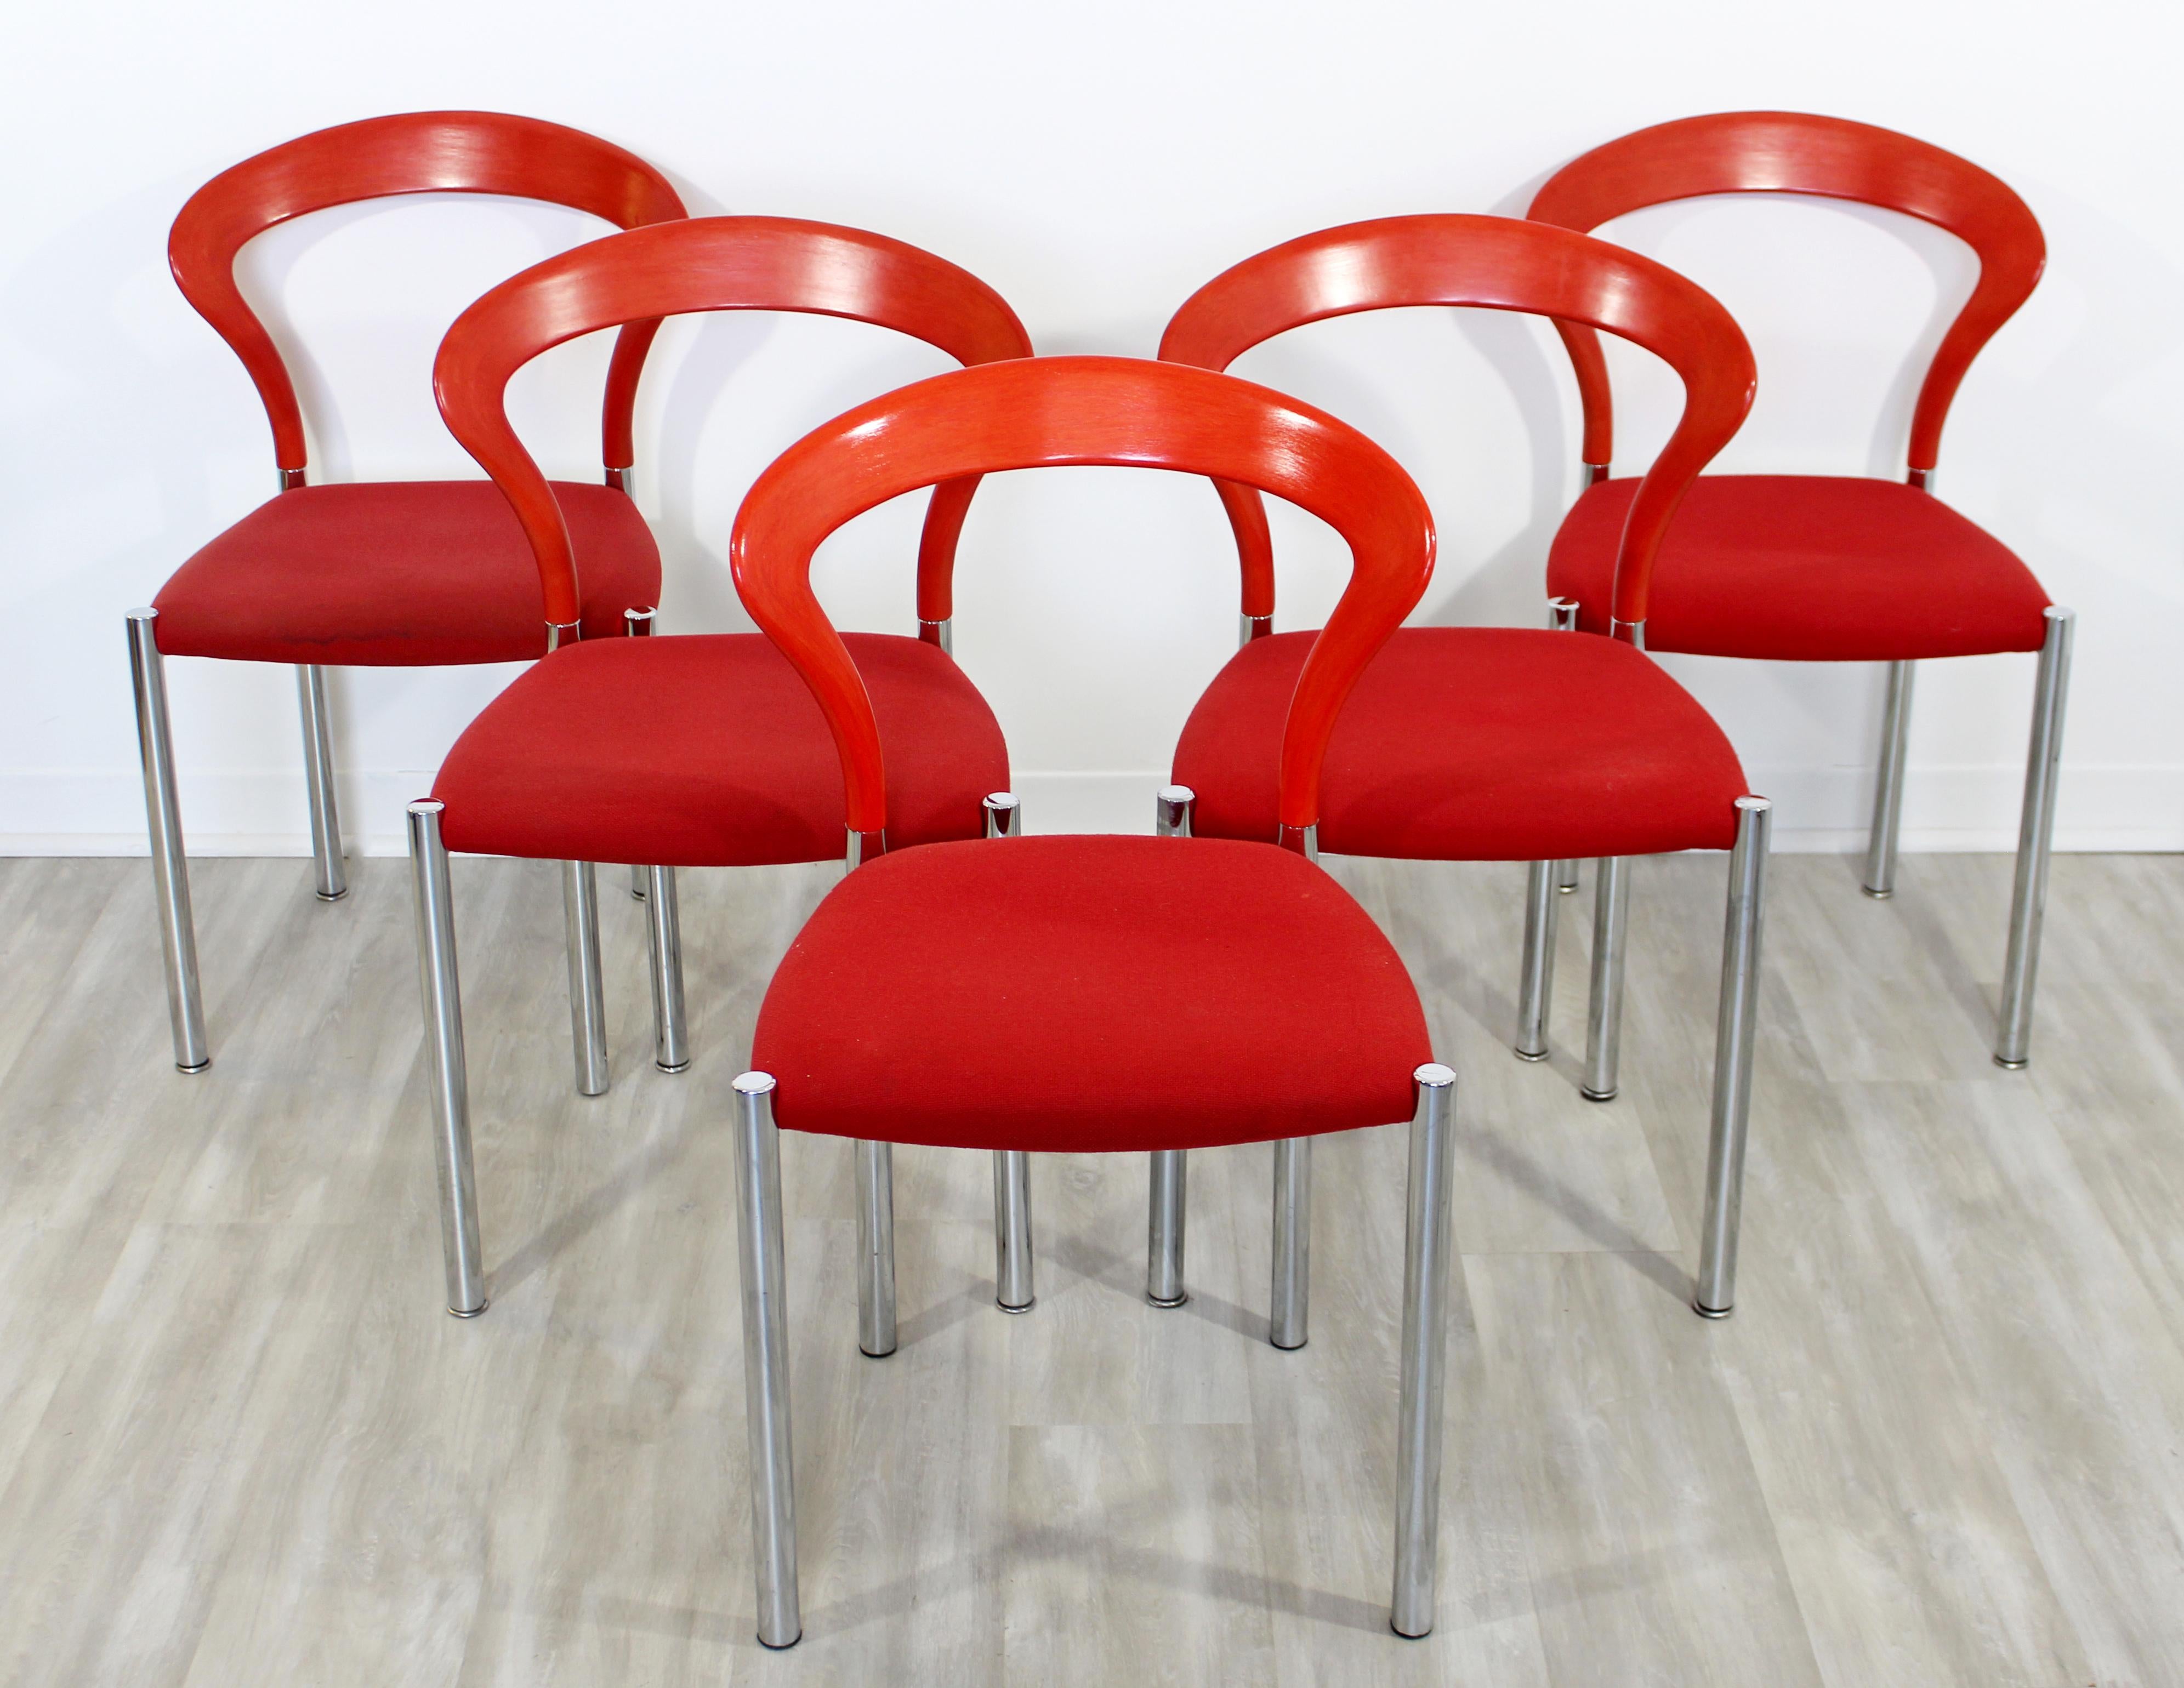 For your consideration is a ravishing set of five Lotus side chairs, on aluminum legs, by Hartmut Lohmeyer for Kusch+Co, made in Germany, circa 1980s. In very good vintage condition. The dimensions are 18.5